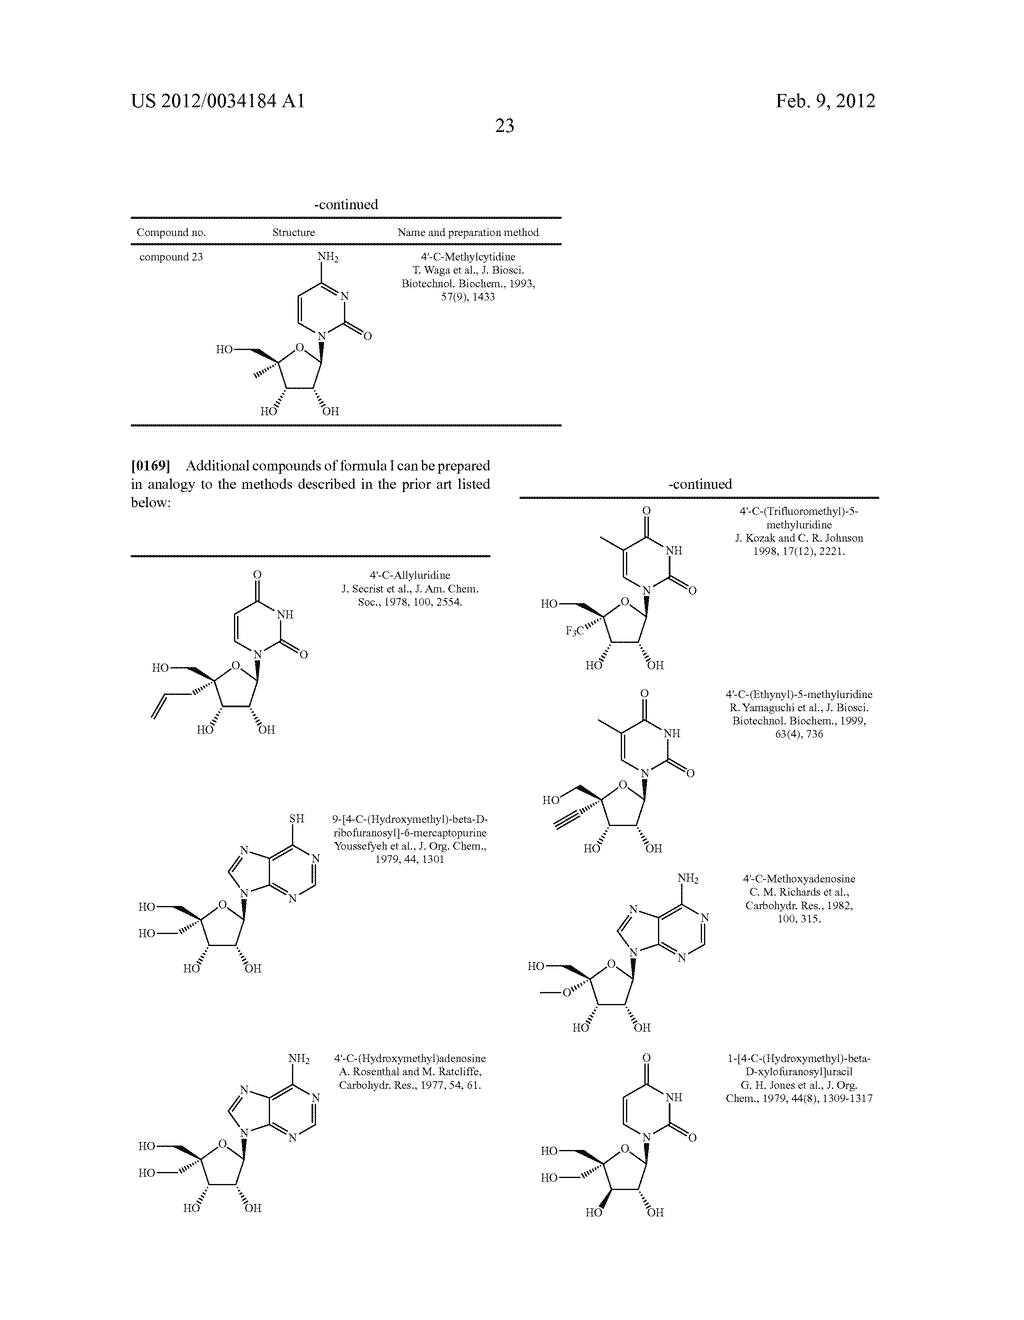 4'-SUBSTITUTED NUCLEOSIDE DERIVATIVES AS INHIBITORS OF HCV RNA REPLICATION - diagram, schematic, and image 24